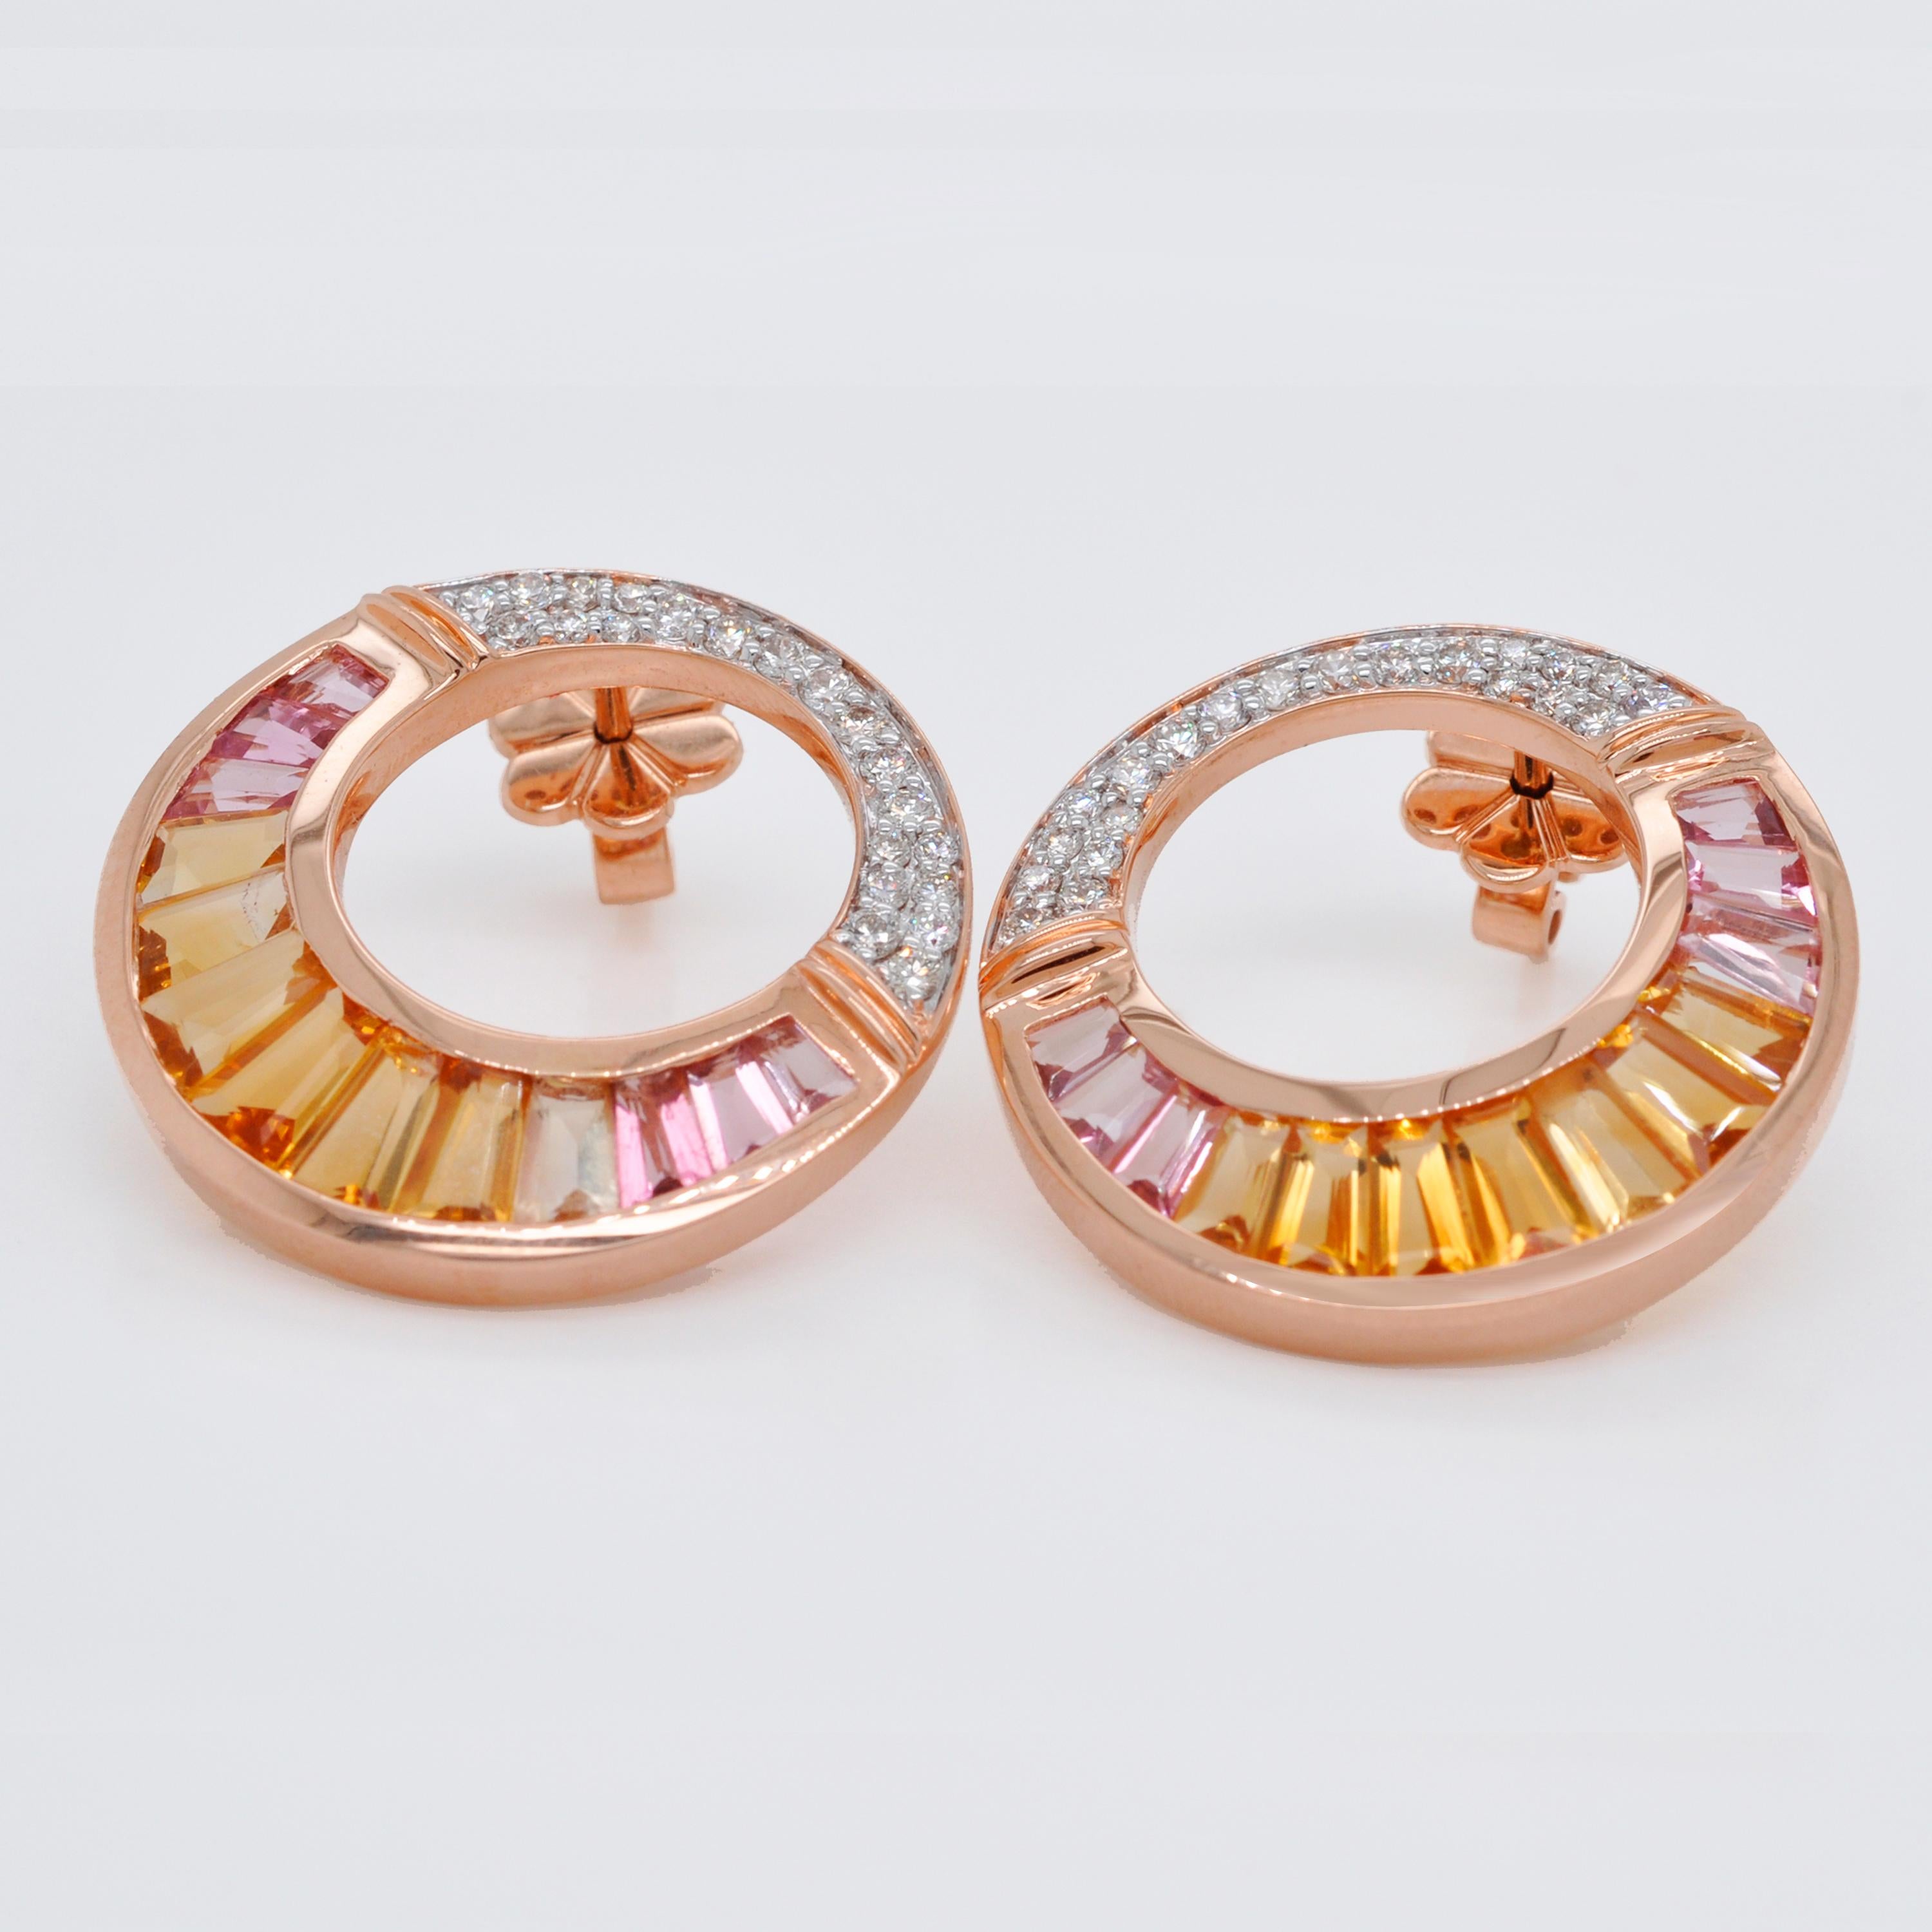 18 Karat Rose Gold Citrine Peach Tourmaline Baguette Diamond Stud Earrings In New Condition For Sale In Jaipur, Rajasthan